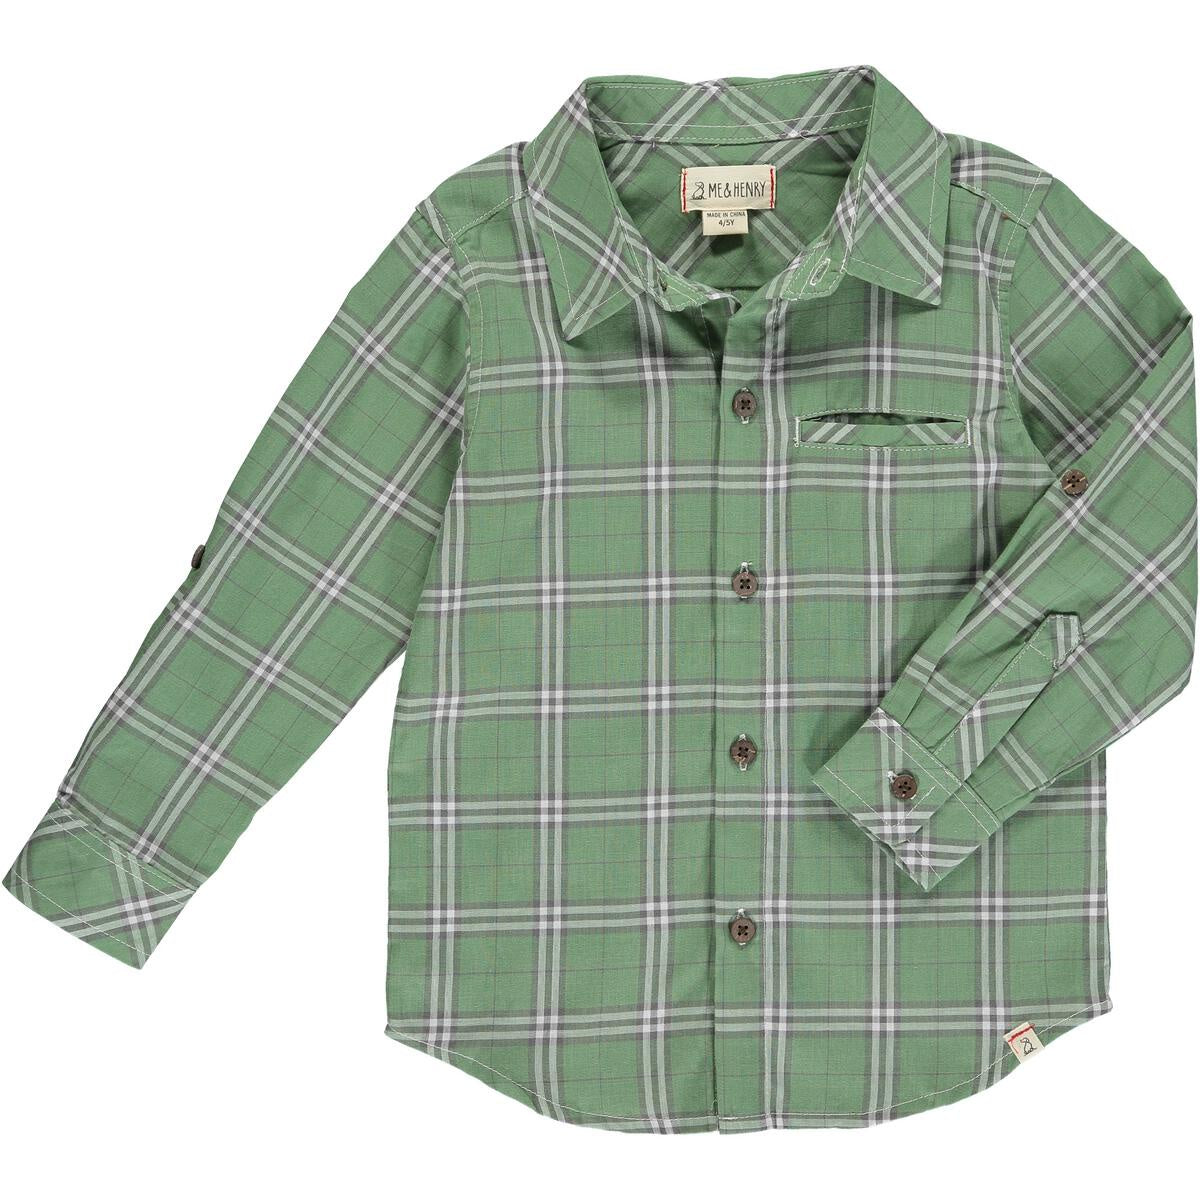 Me & Henry Atwood Woven Shirt HB1135 5008